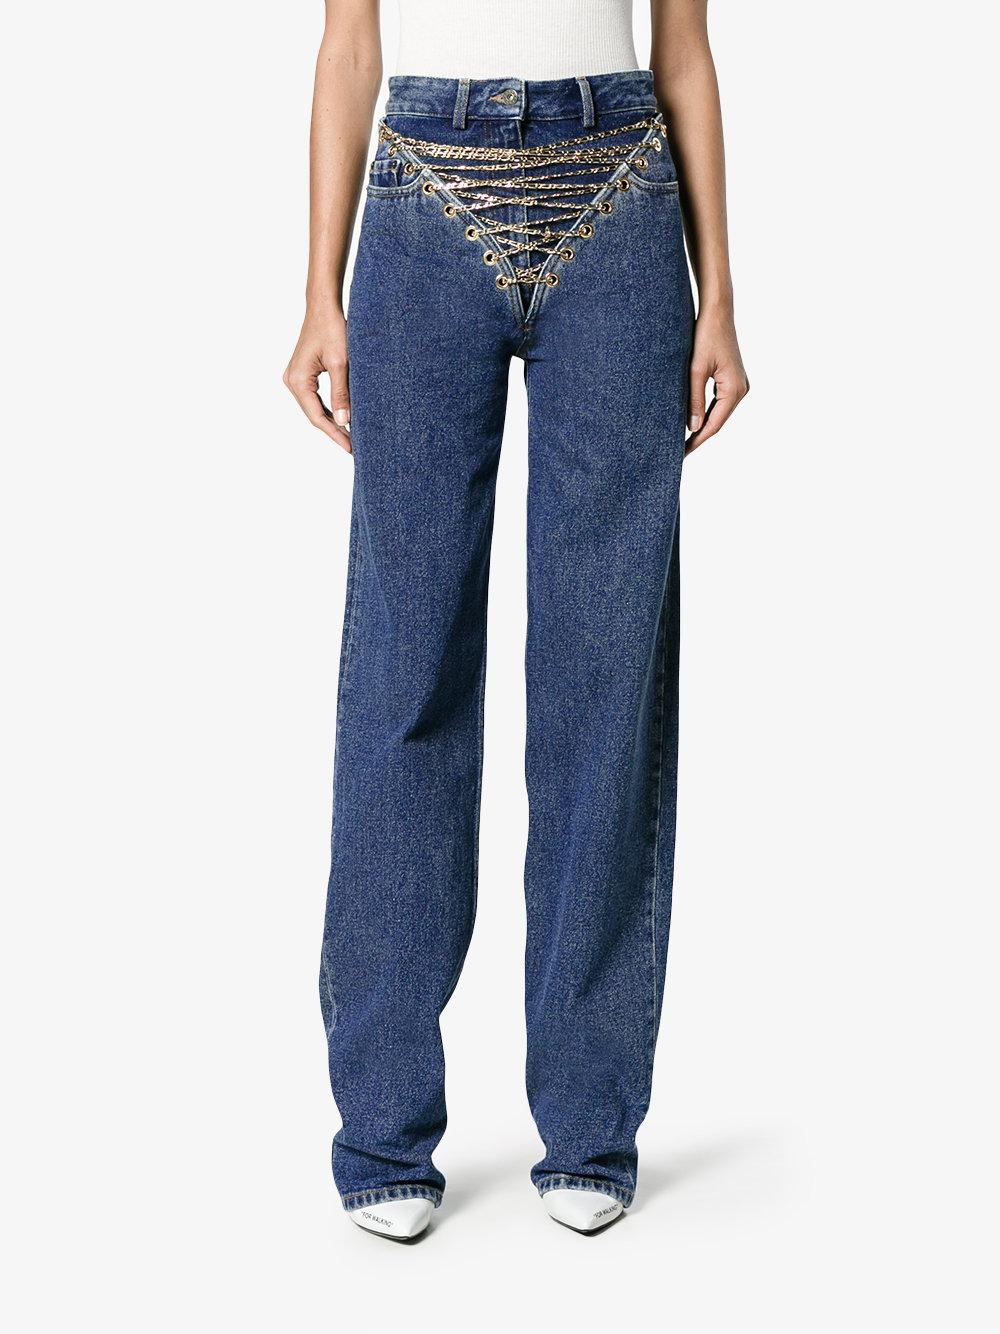 Y. Project Chained Jeans in Blue | Lyst